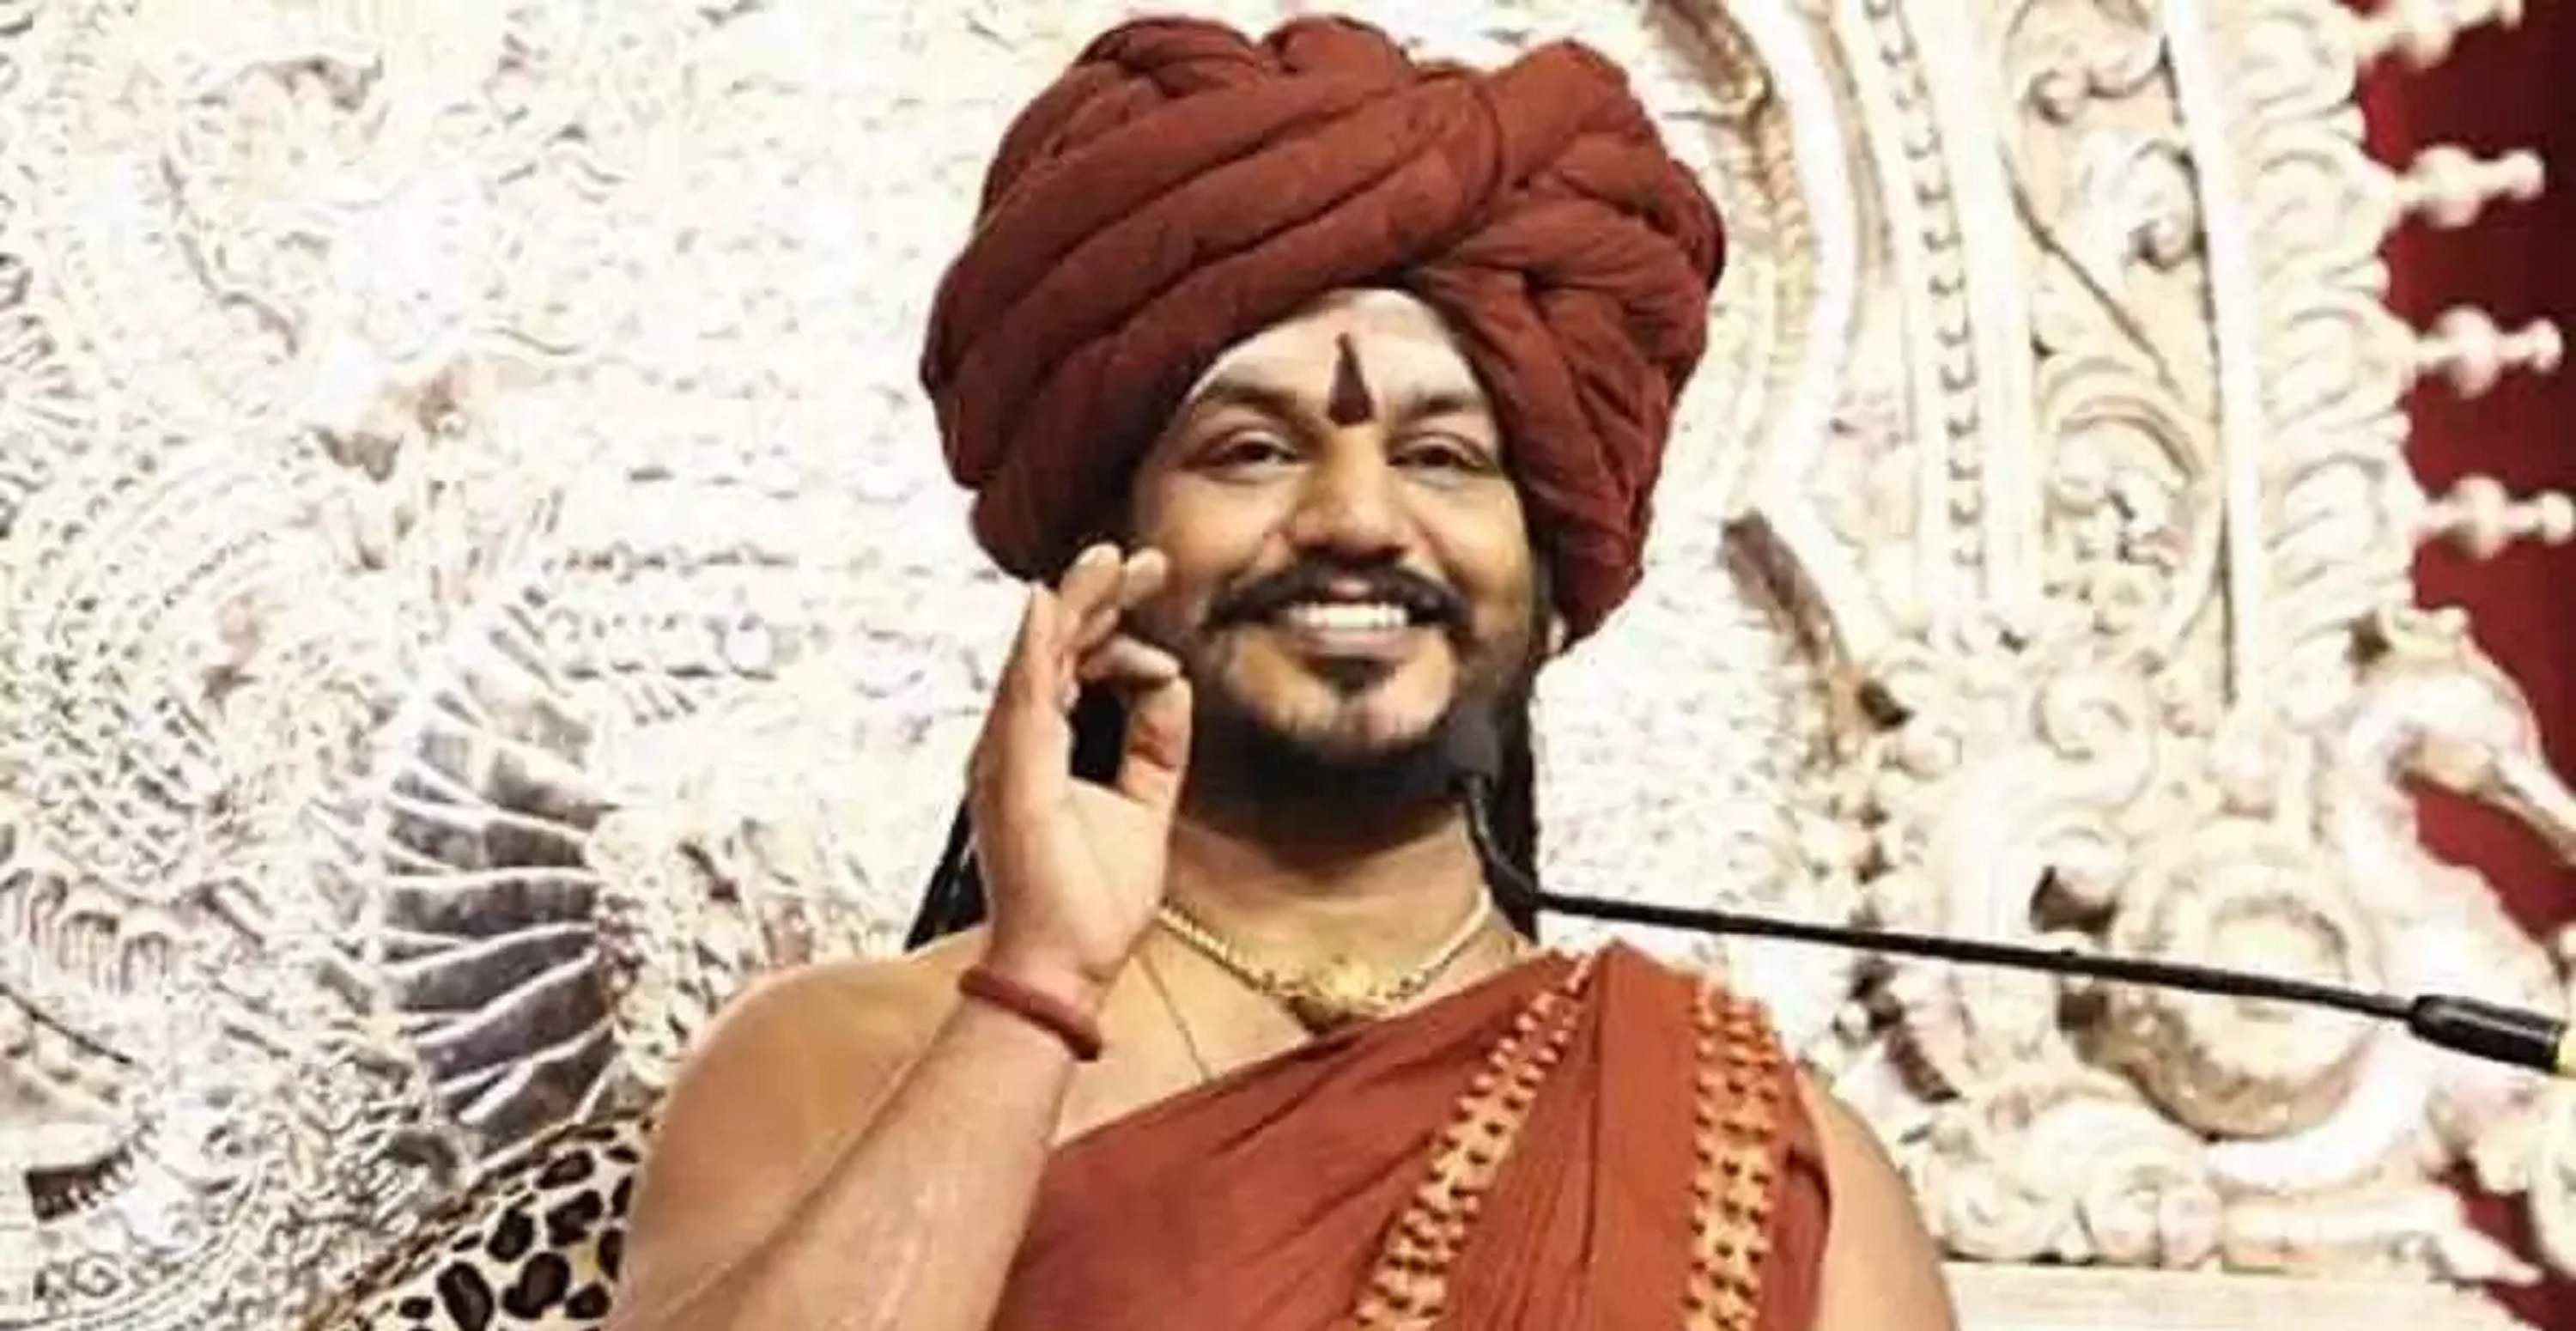 Rape Accused “Baba” Nithyananda, Who Fled India, Has Now Bought an Island & Declared It a Separate Country!